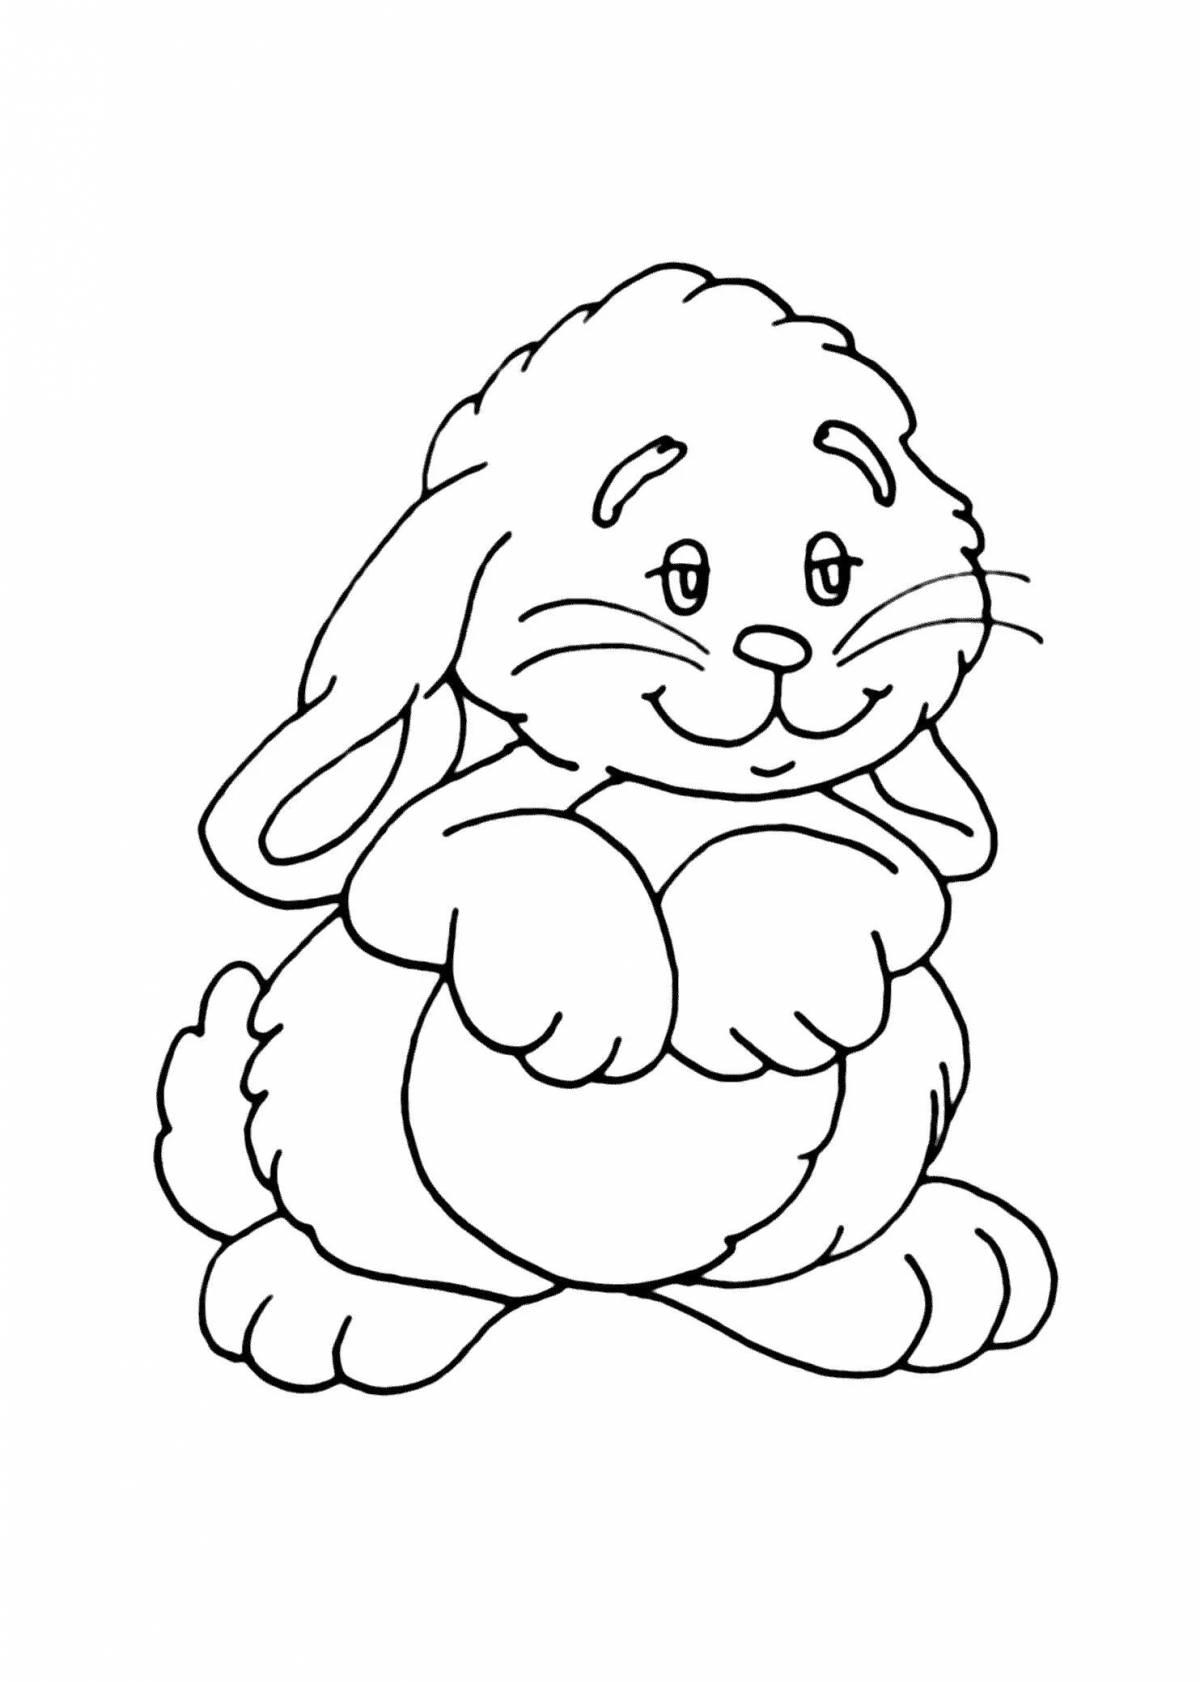 Coloring page friendly rabbit on the bench